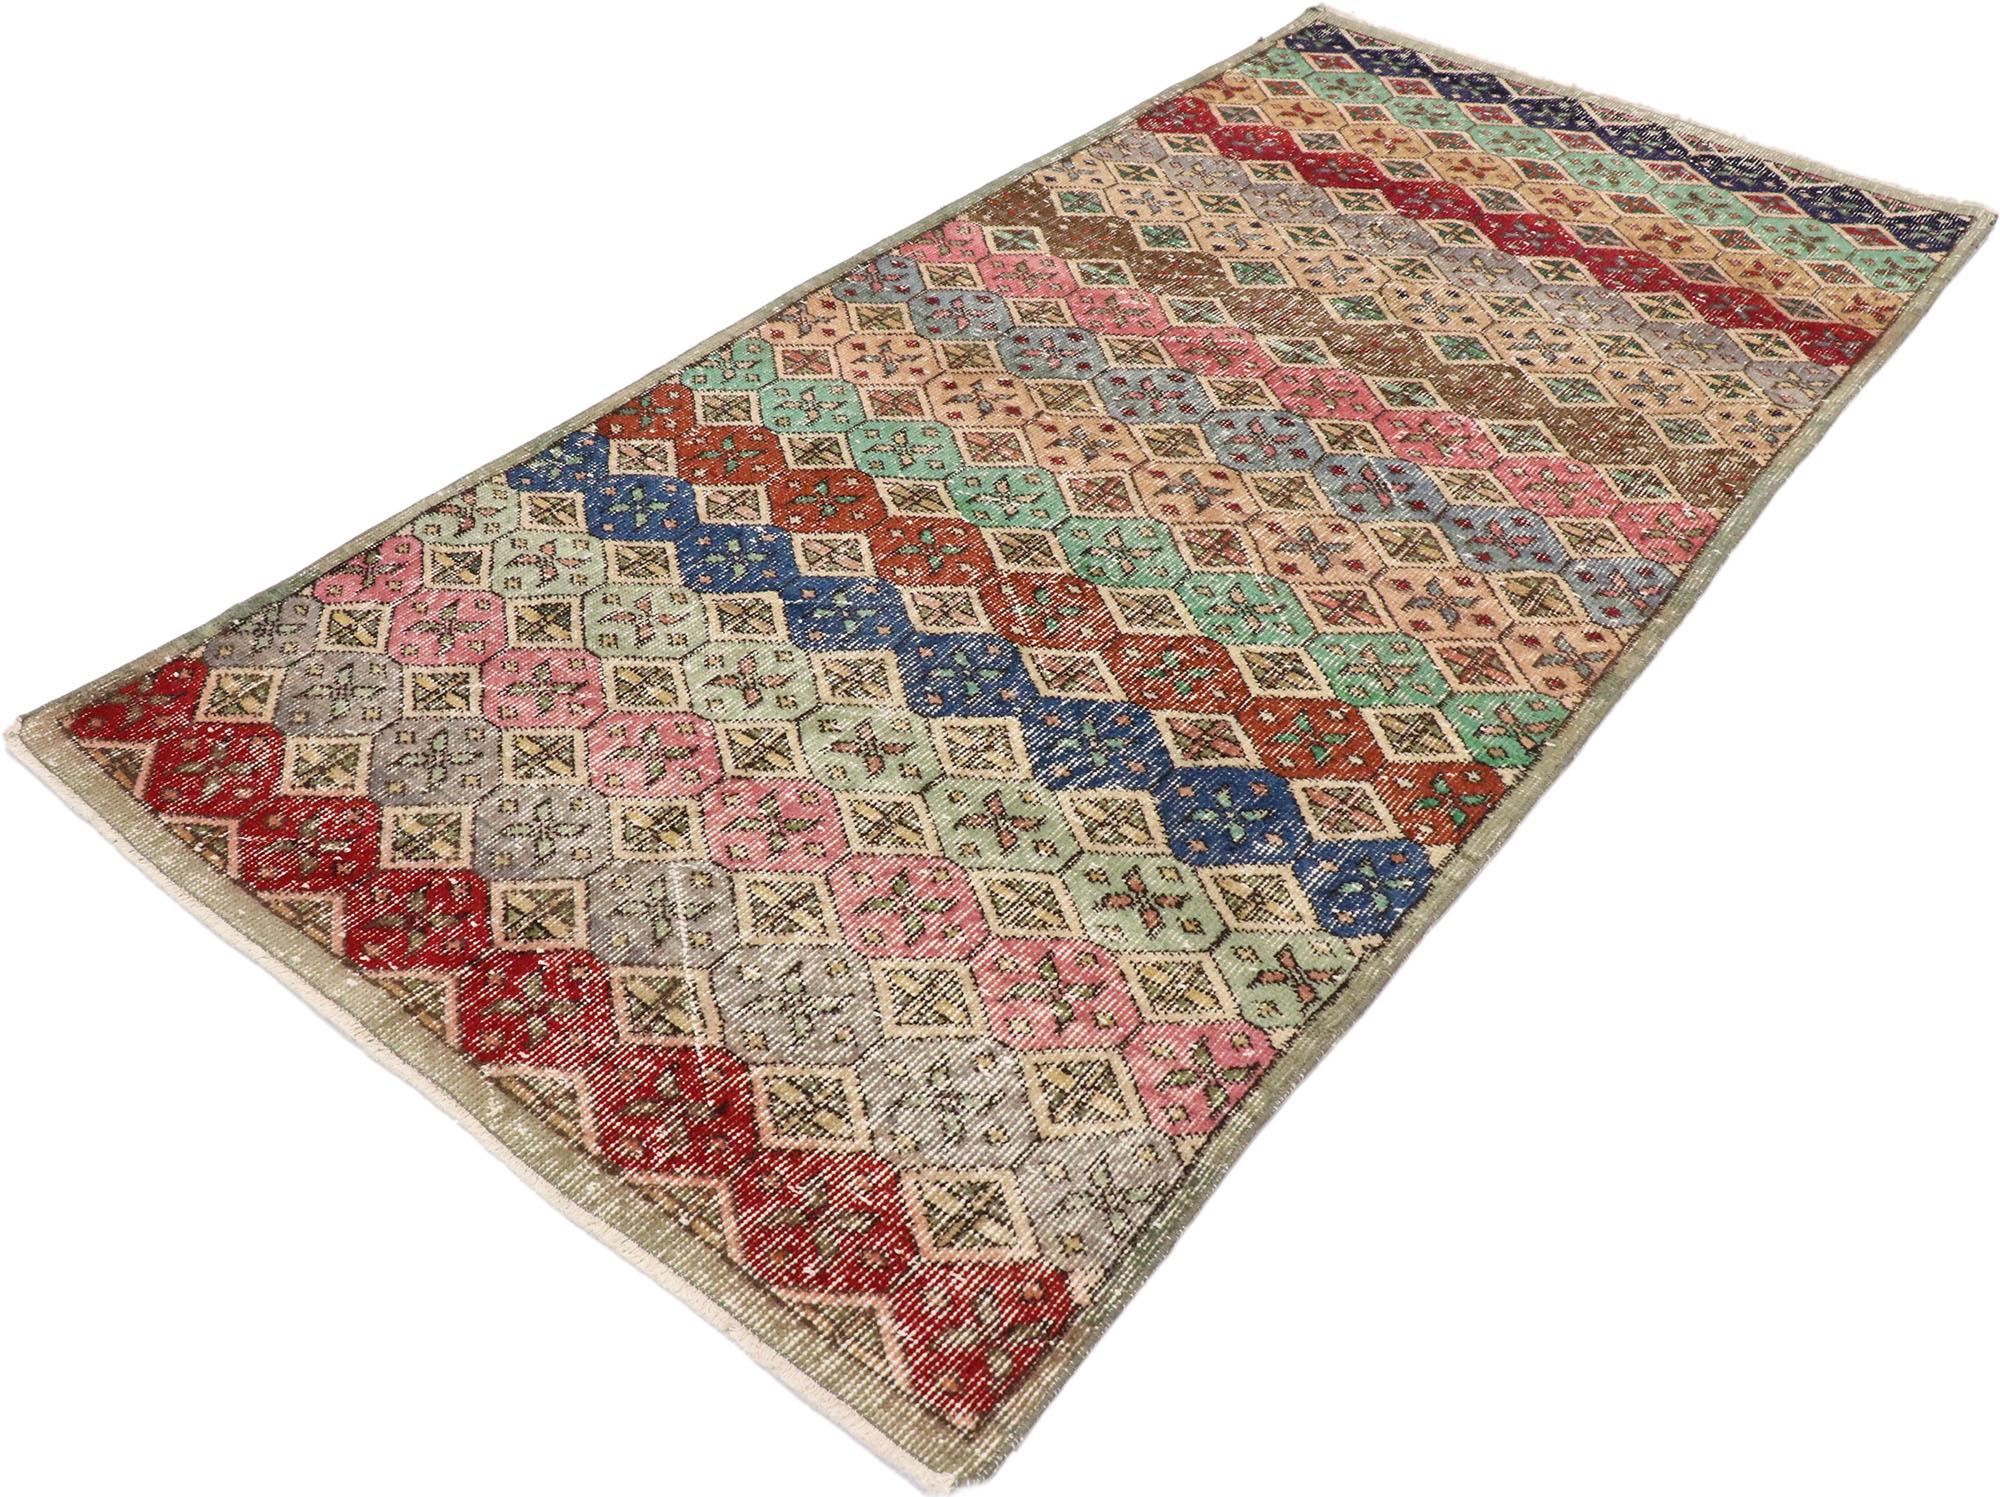 53344, Distressed Vintage Turkish Sivas Rug with Rustic Postmodern Style. This hand knotted wool distressed vintage Turkish Sivas rug features an all-over botanical lattice pattern comprised of hexagons and diamonds embellished with stylized leaves.